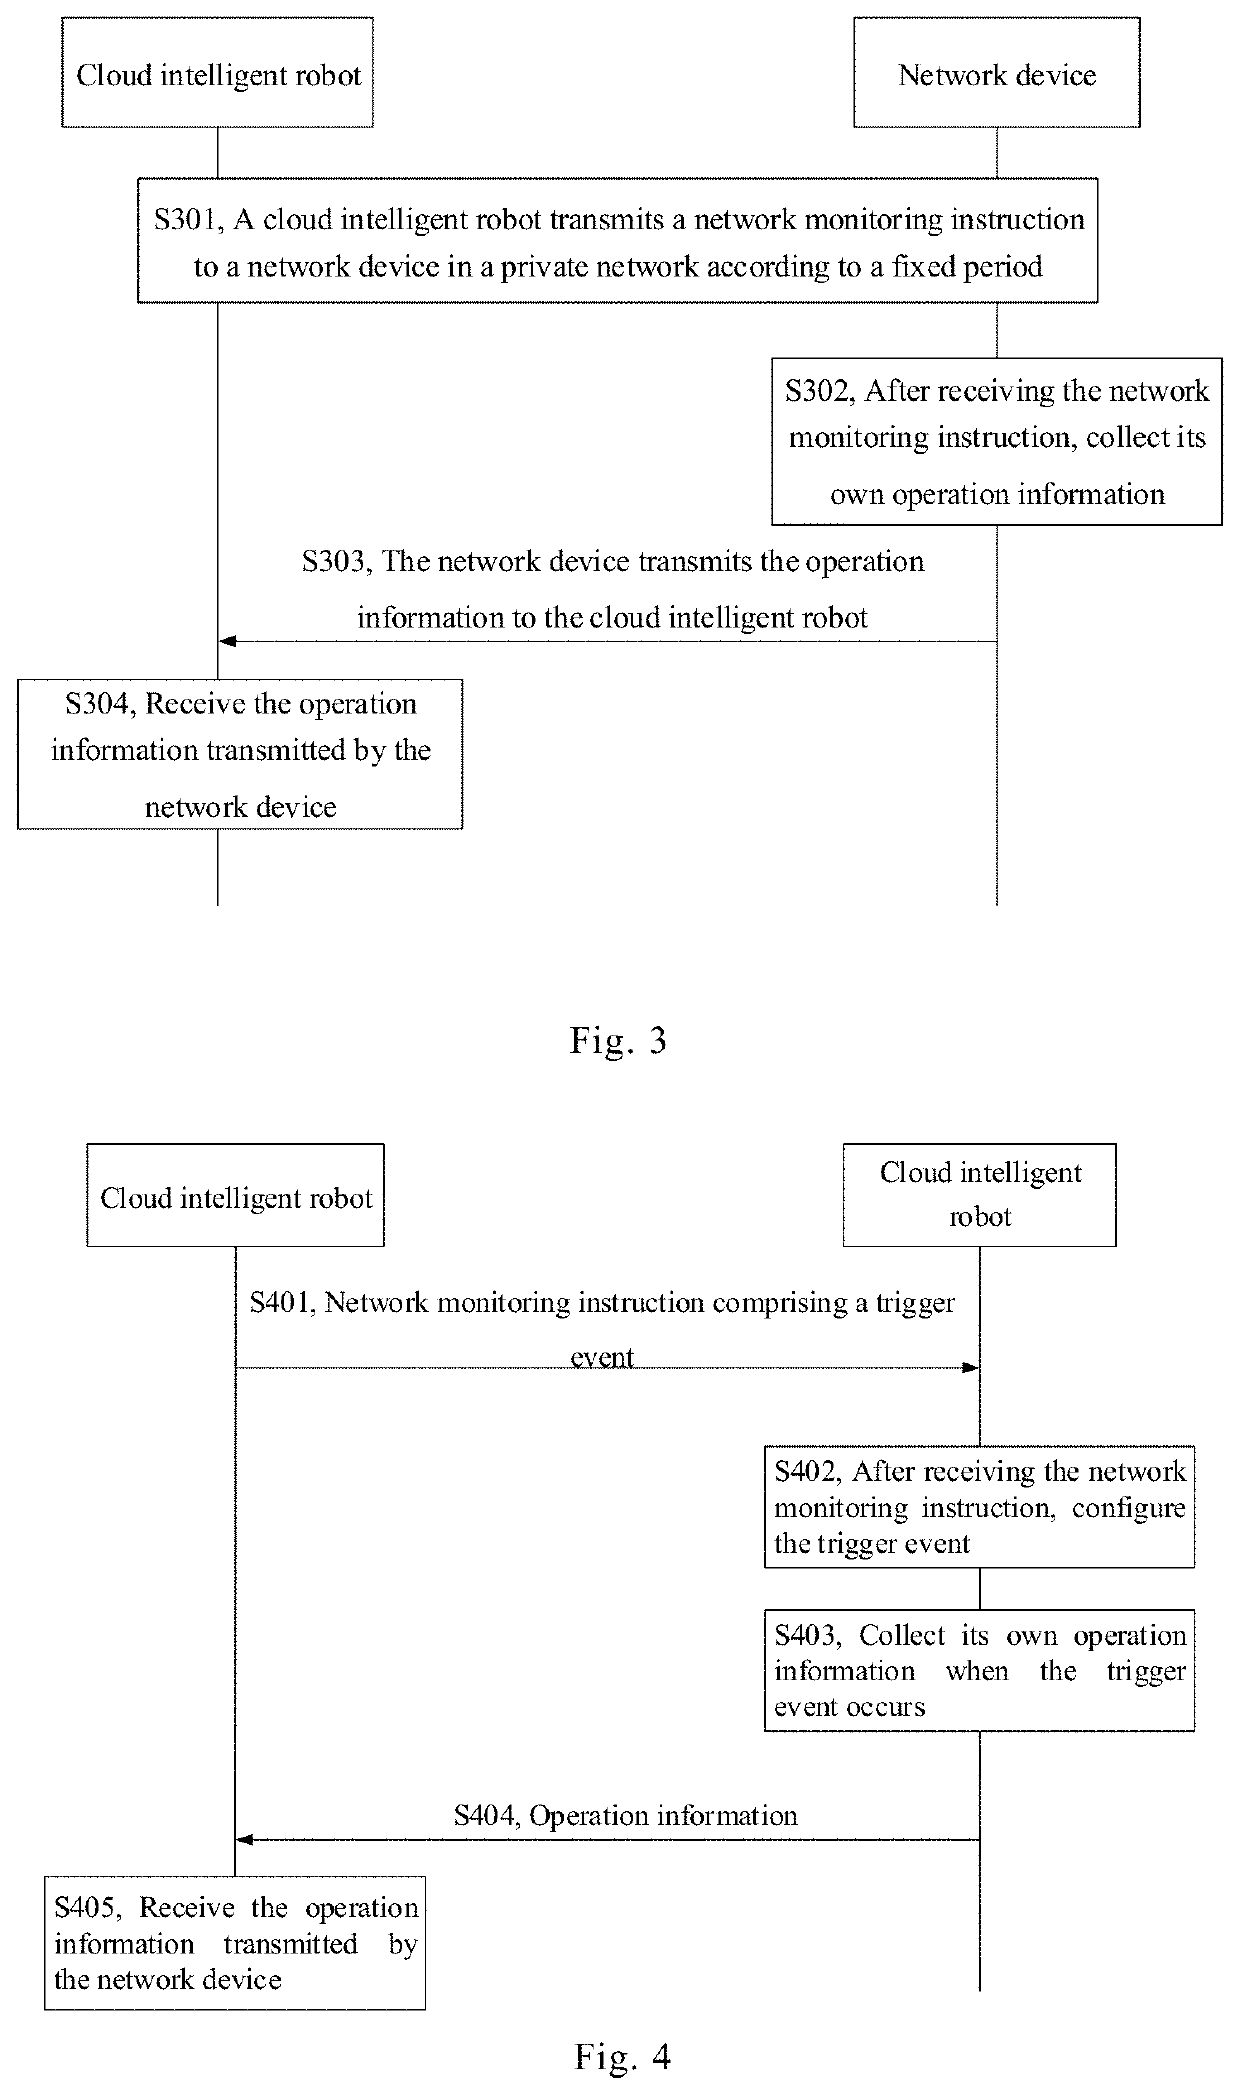 Network diagnosis method, cloud intelligent robot, network device and private network